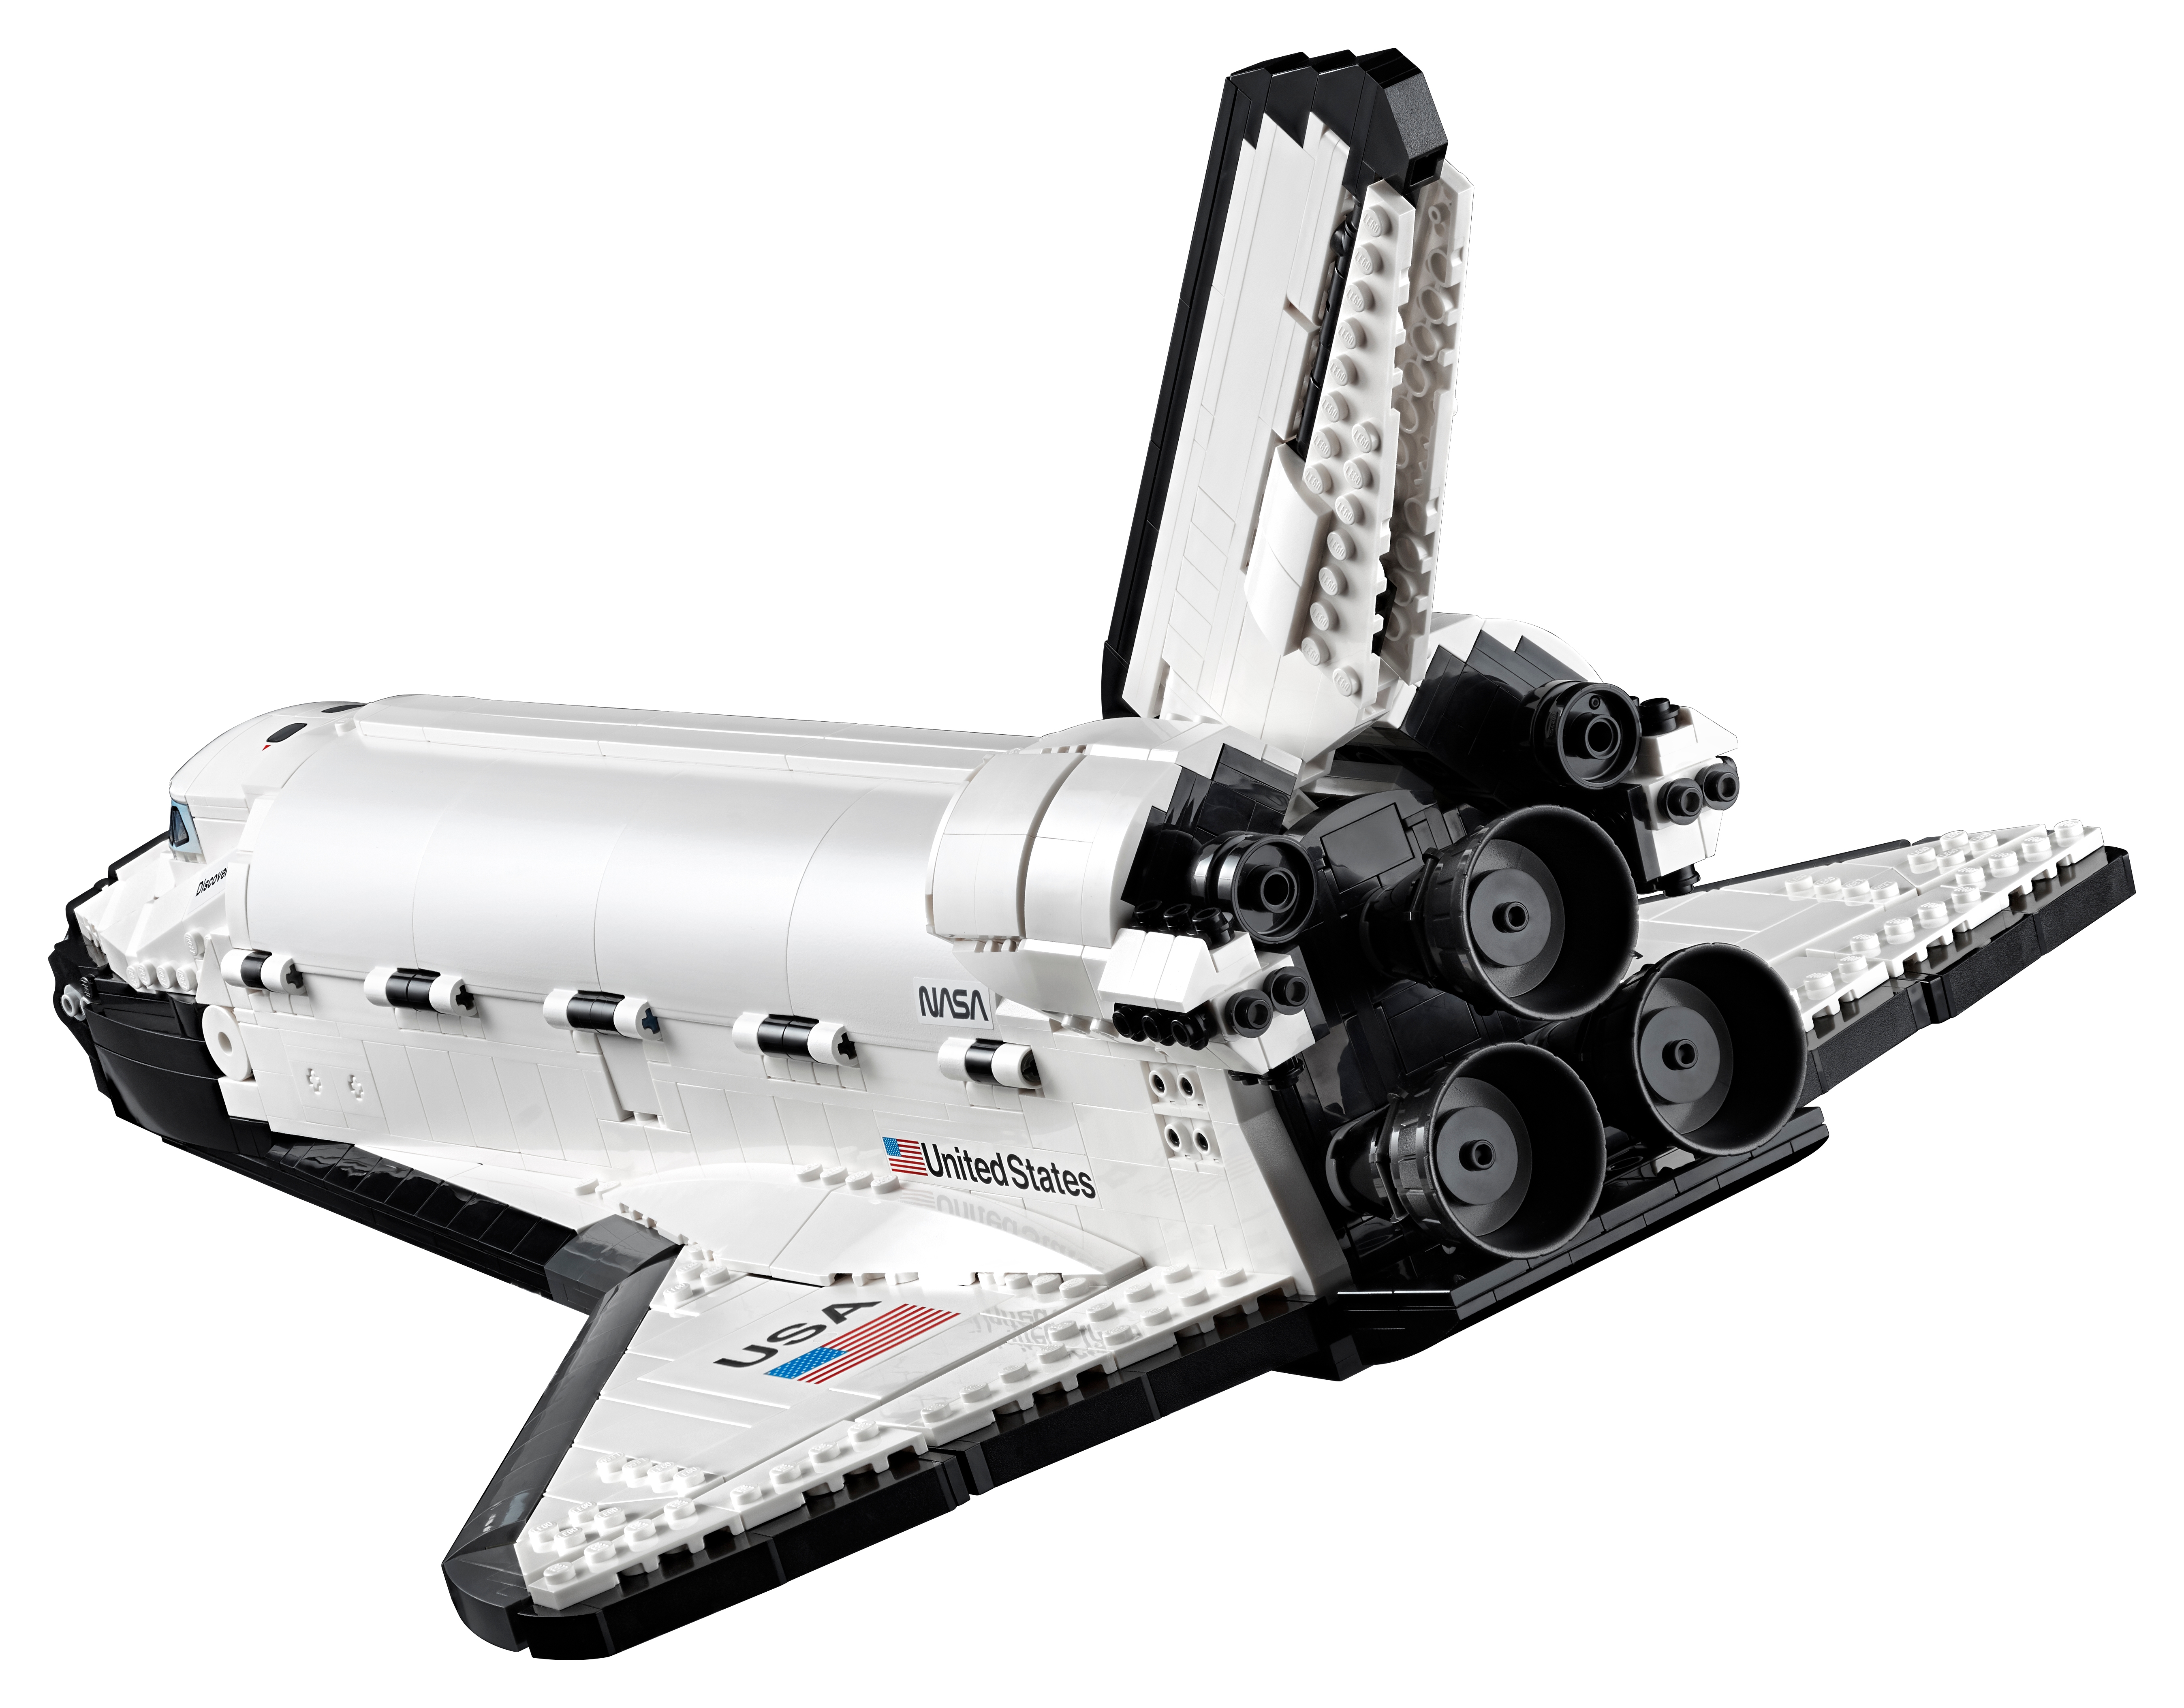 NASA Space Shuttle Discovery 10283, LEGO® Icons